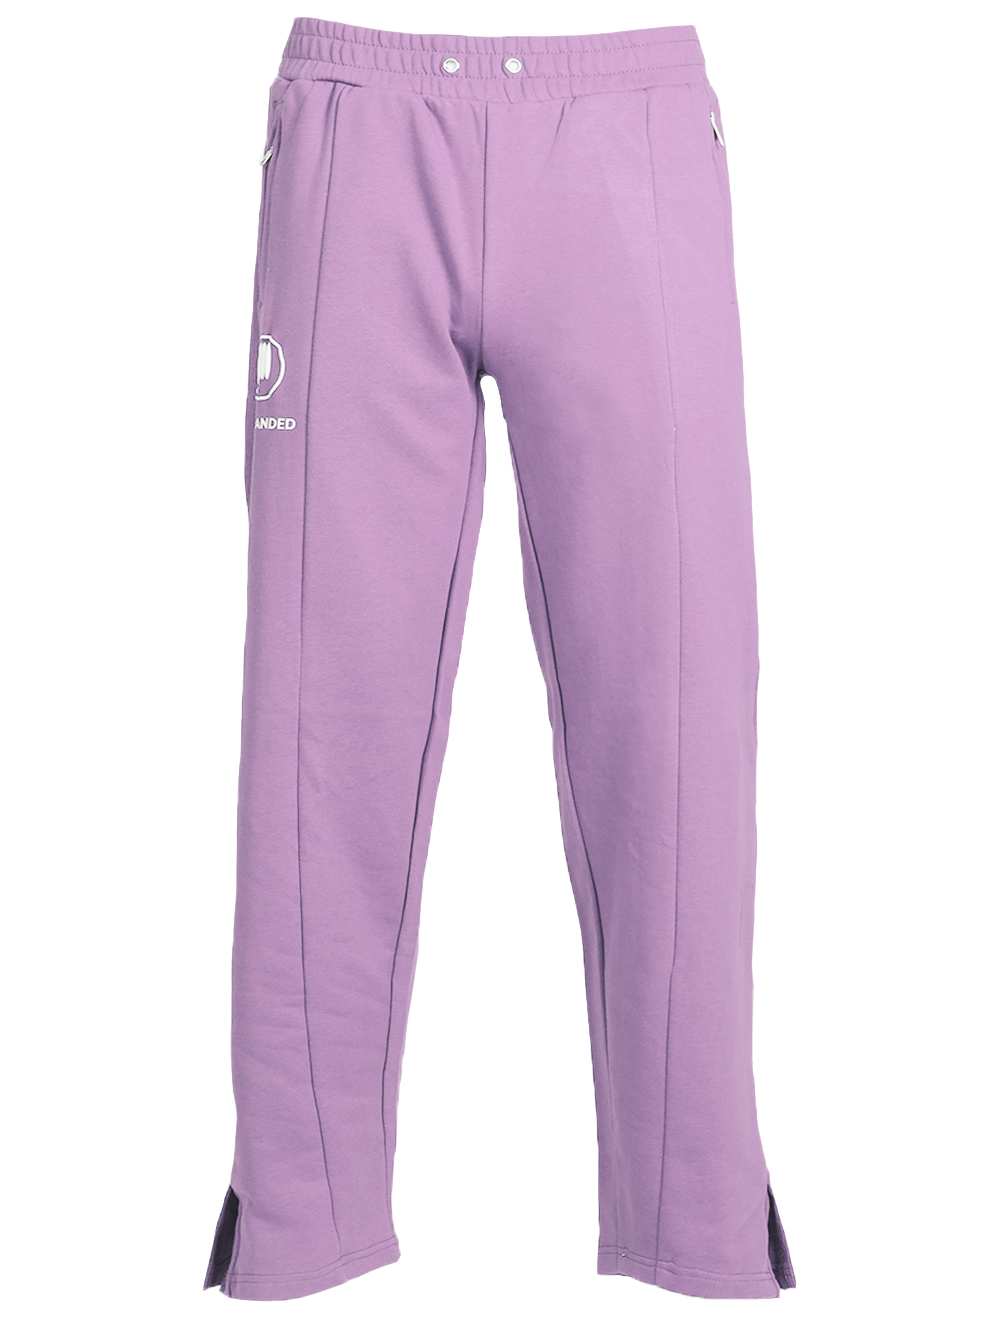 LAVENDER TAILORED PANTS